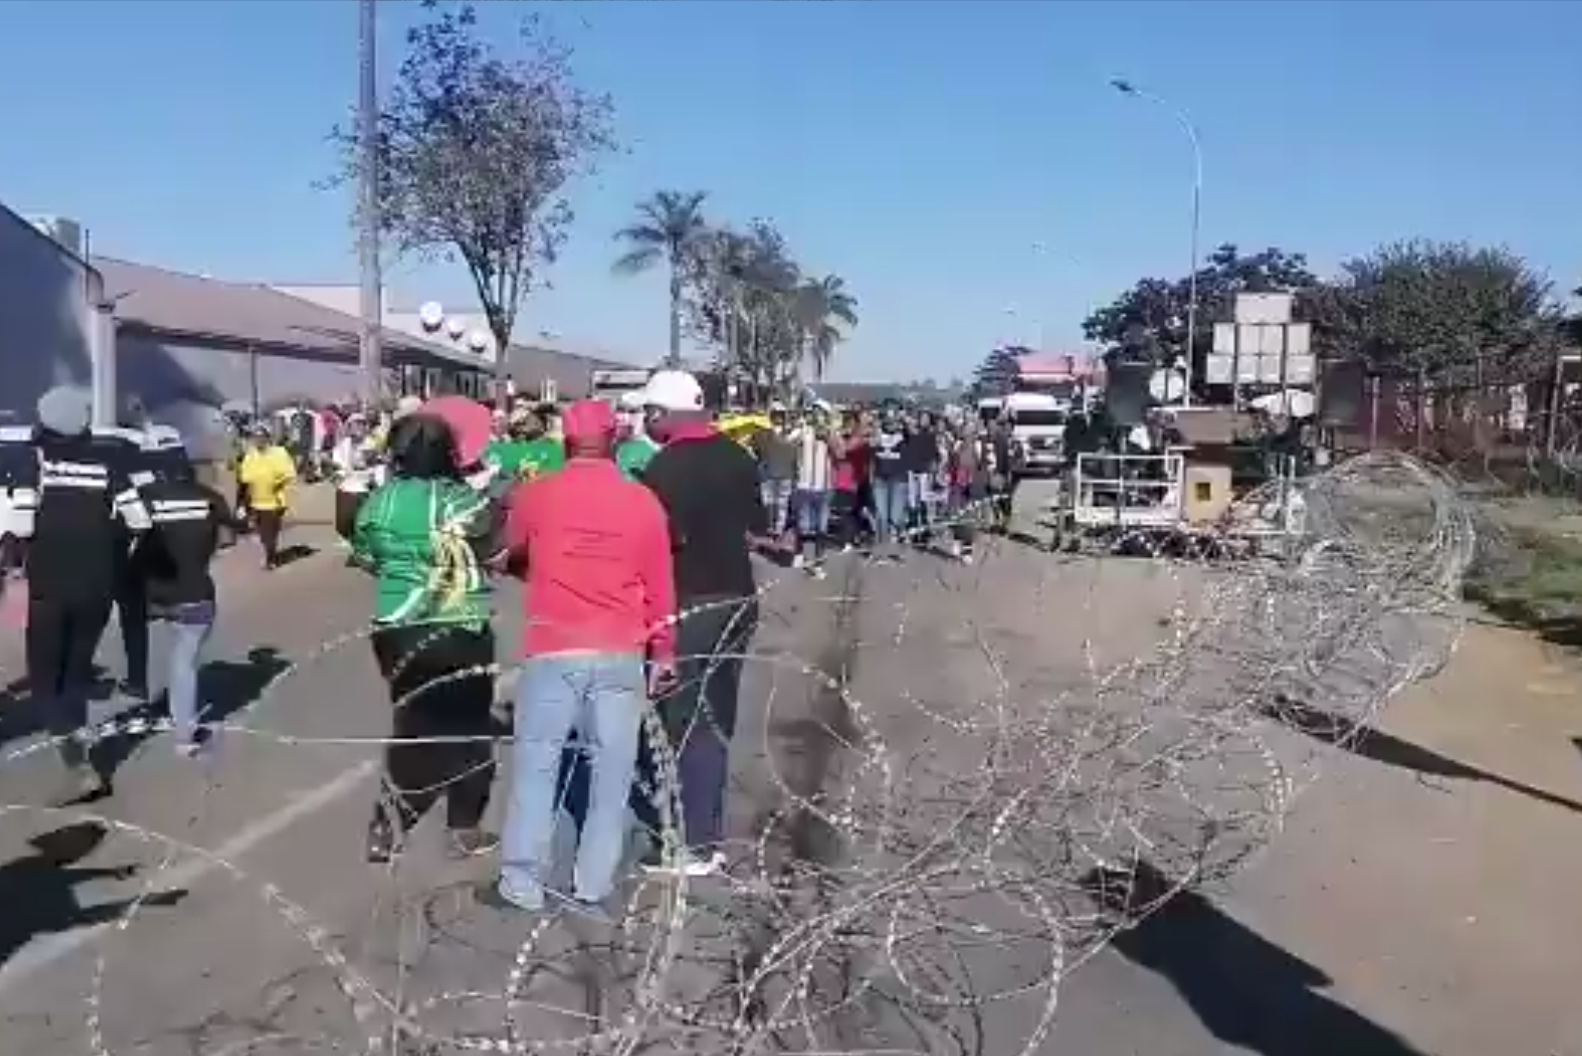 Police and protesters clash in Mkhondo